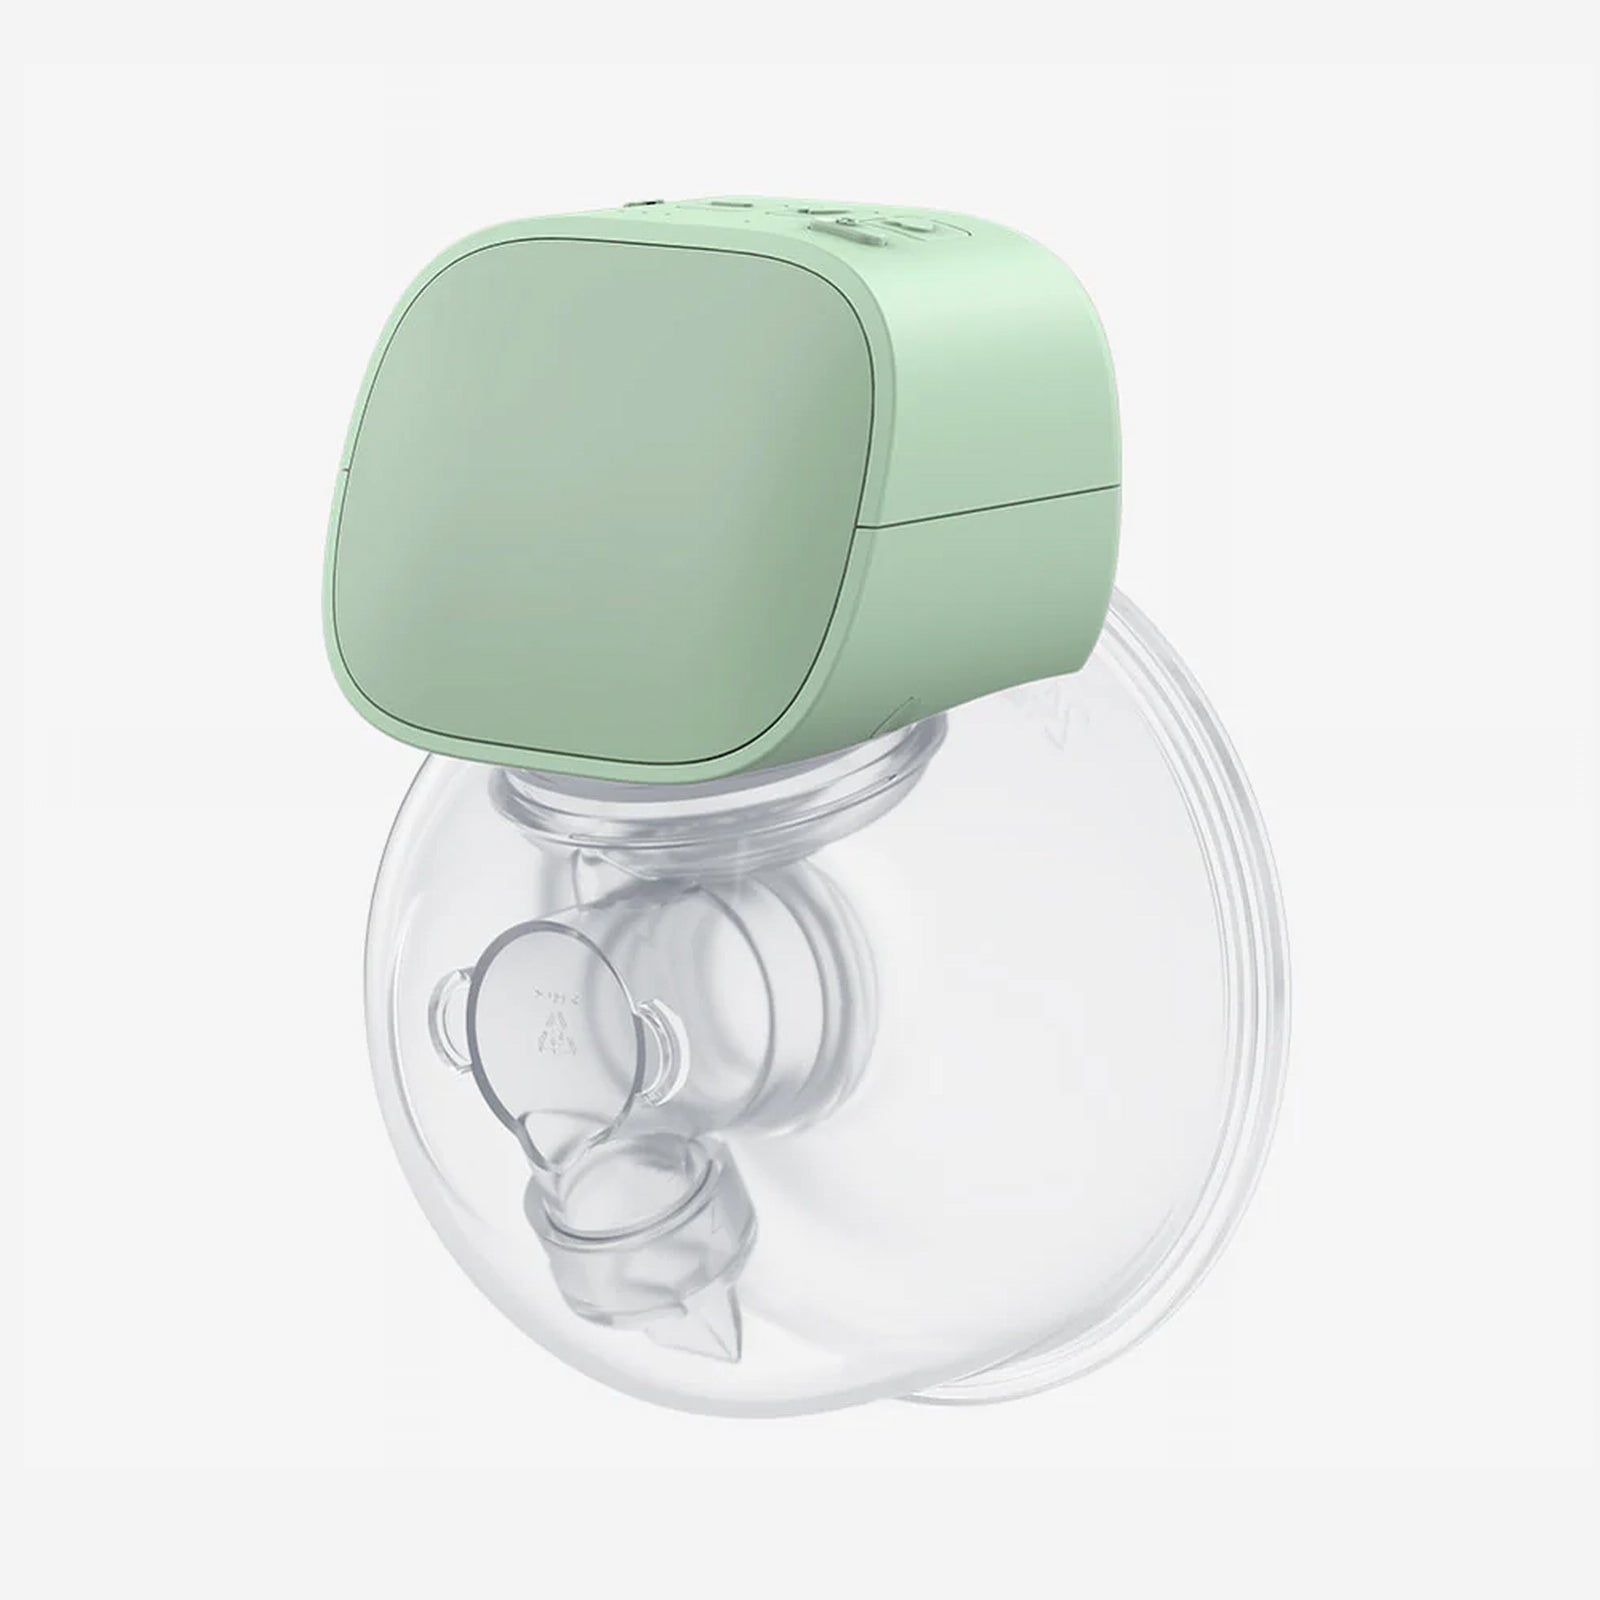 XIMYRA S10 Wearable Breast Pump Wireless Electric Portable Breastfeeding  Pumps, The Breastpump Can Be Worn in